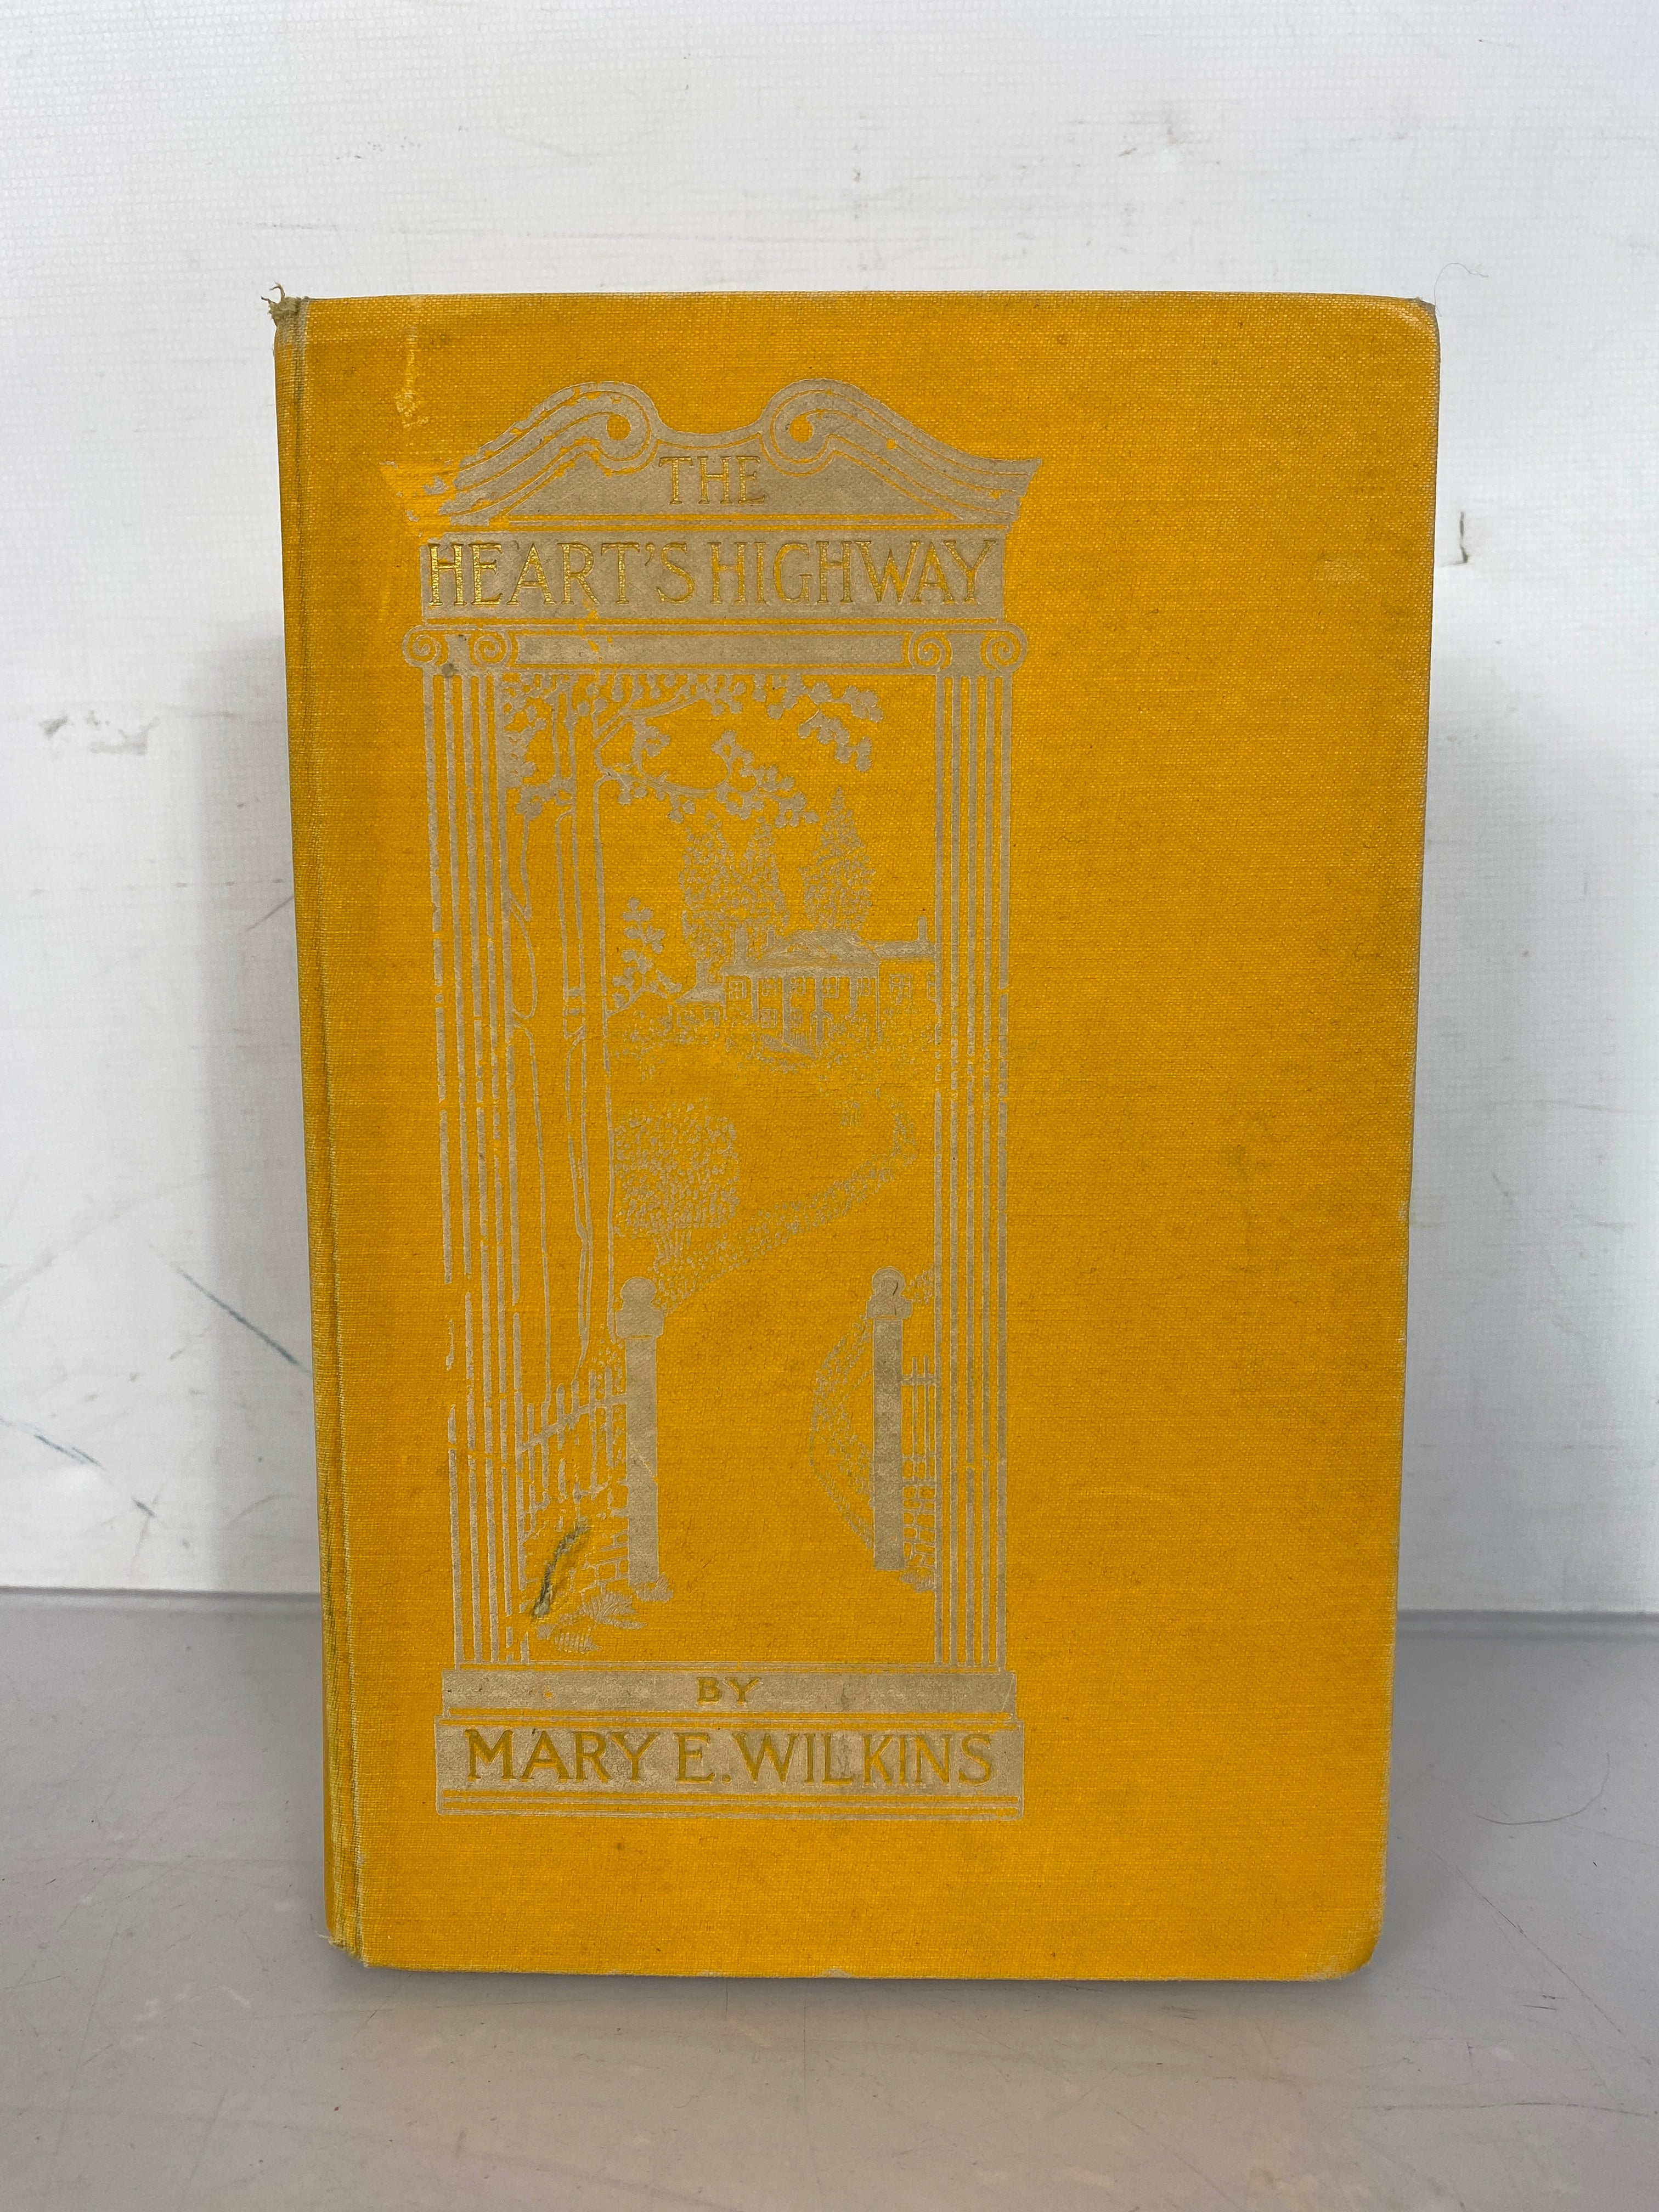 Antique The Heart's Highway A Romance of Virginia in the Seventeenth Century by Mary E. Wilkins 1900 HC